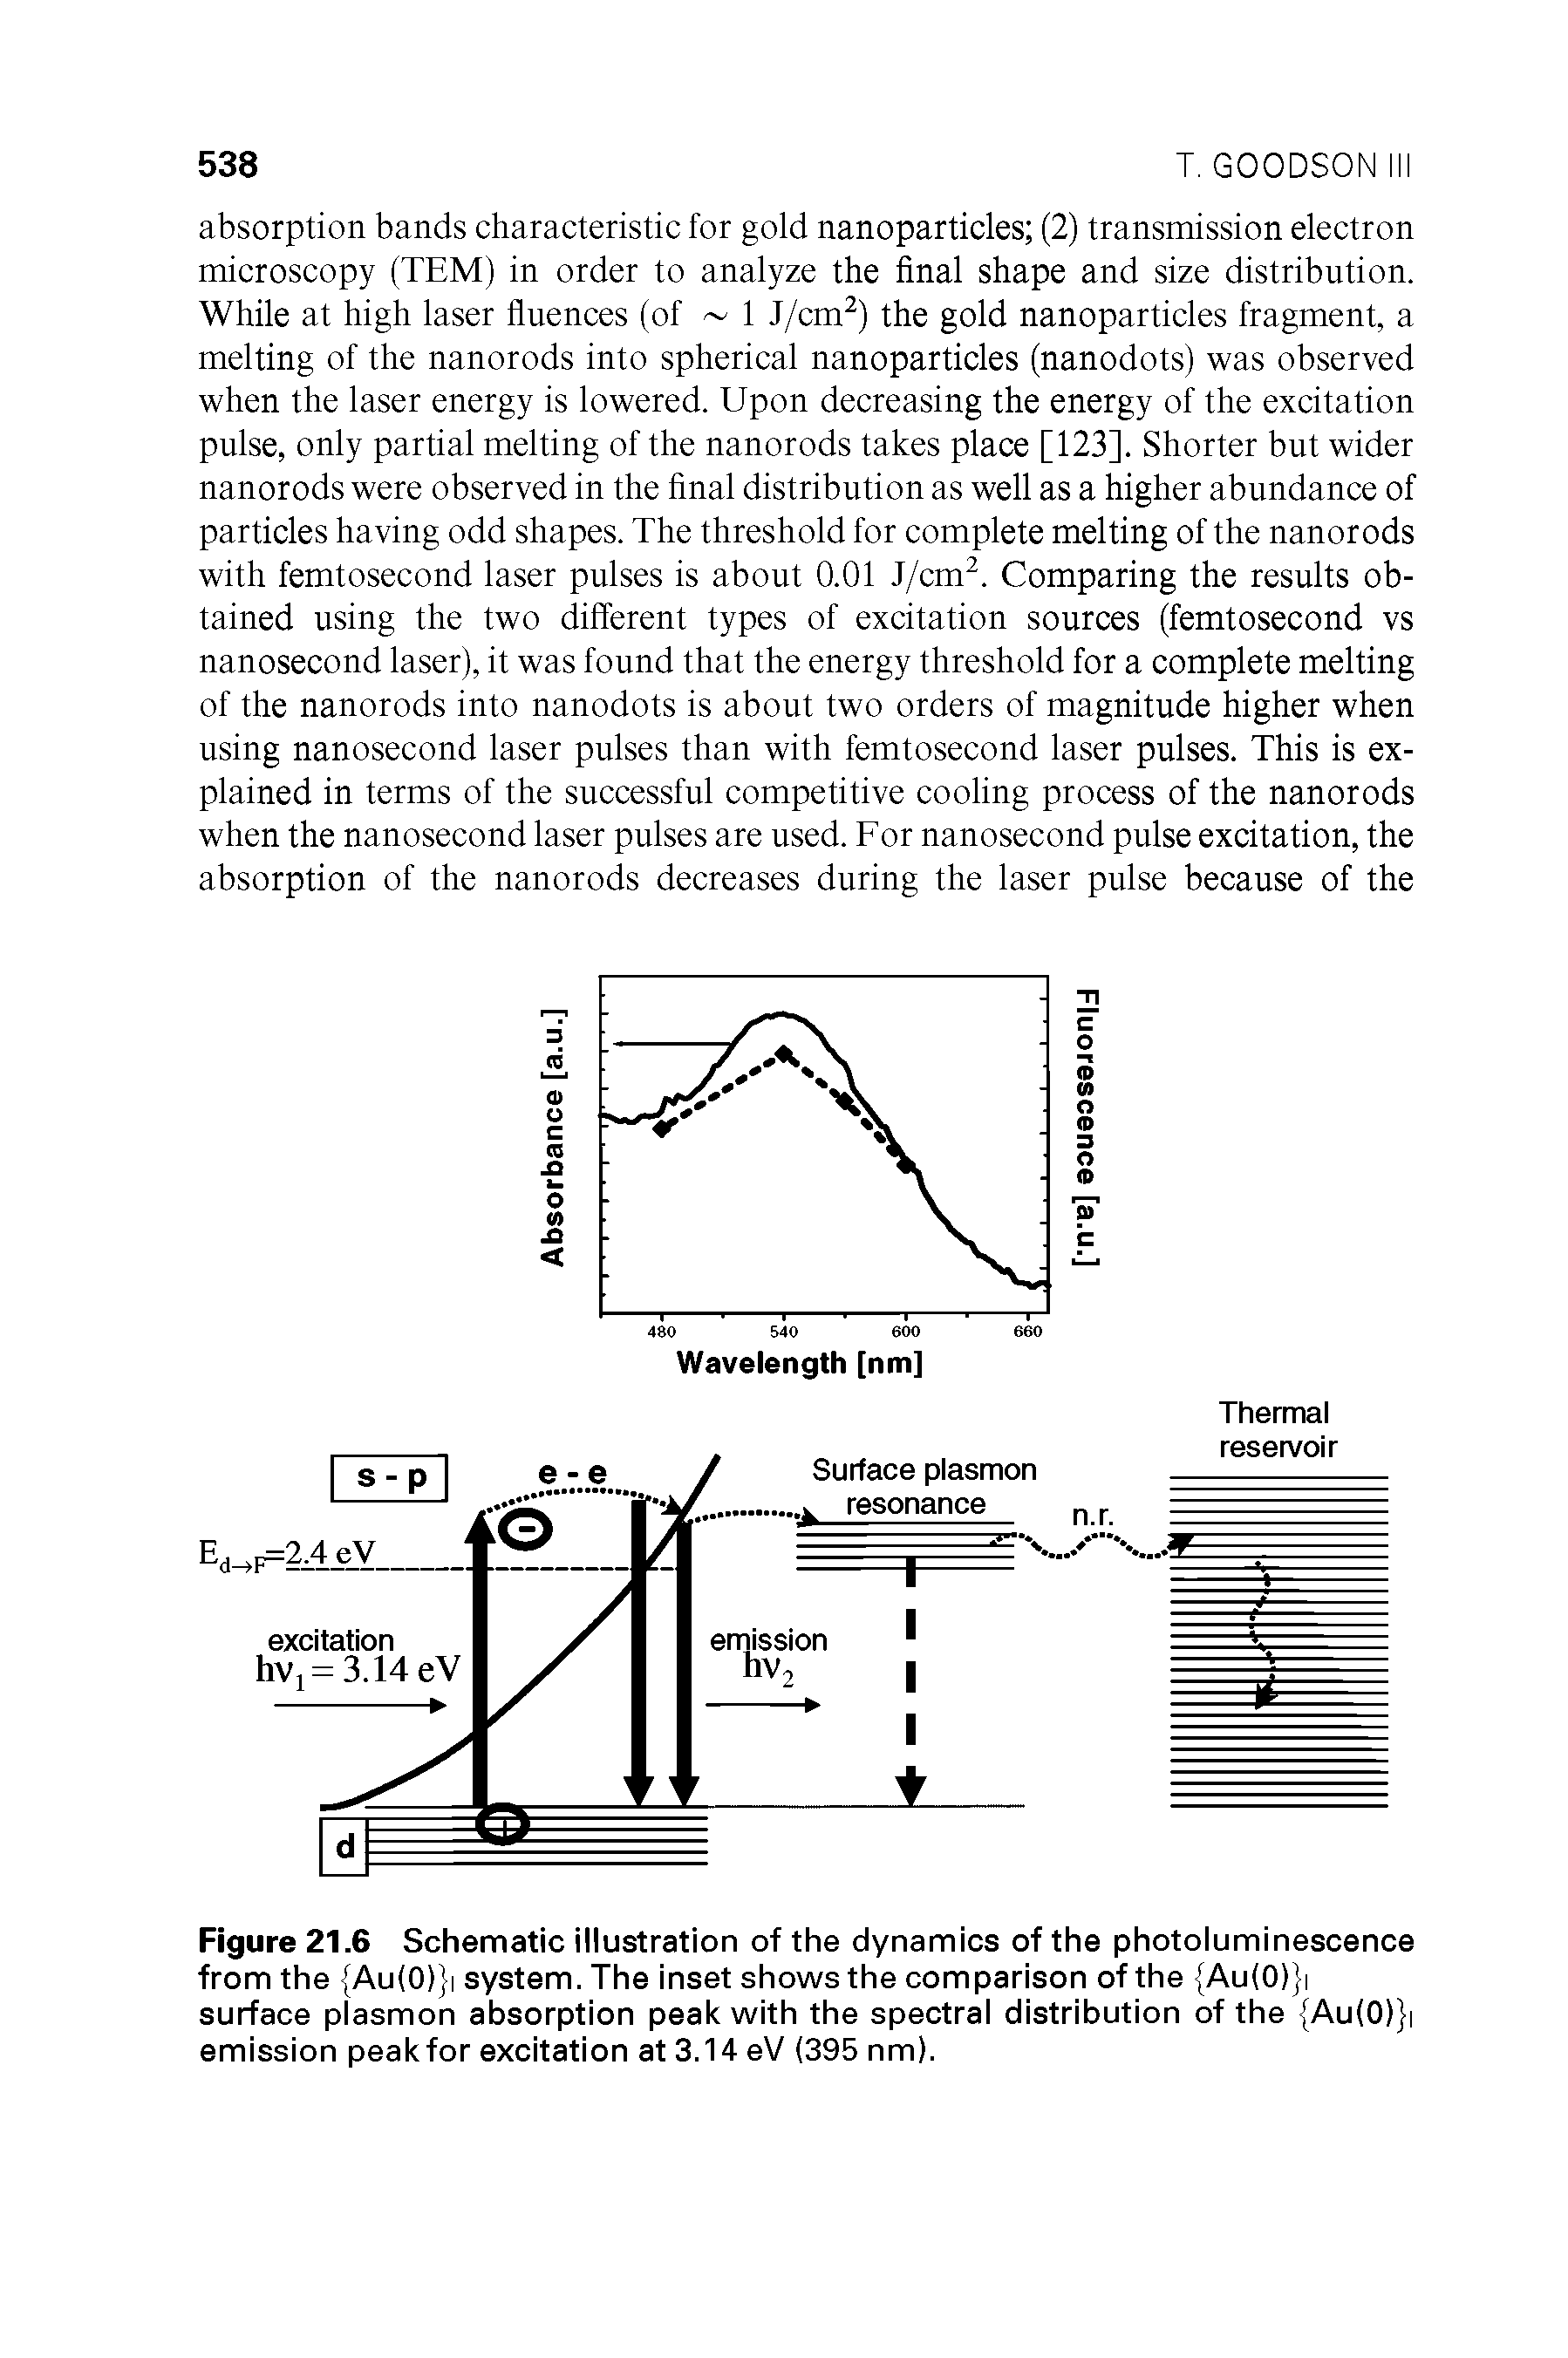 Figure 21.6 Schematic illustration of the dynamics of the photoluminescence from the Au(0) i system. The inset shows the comparison of the Au(0) i surface plasmon absorption peak with the spectral distribution of the Au(0) i emission peakfor excitation at 3.14 eV (395 nm).